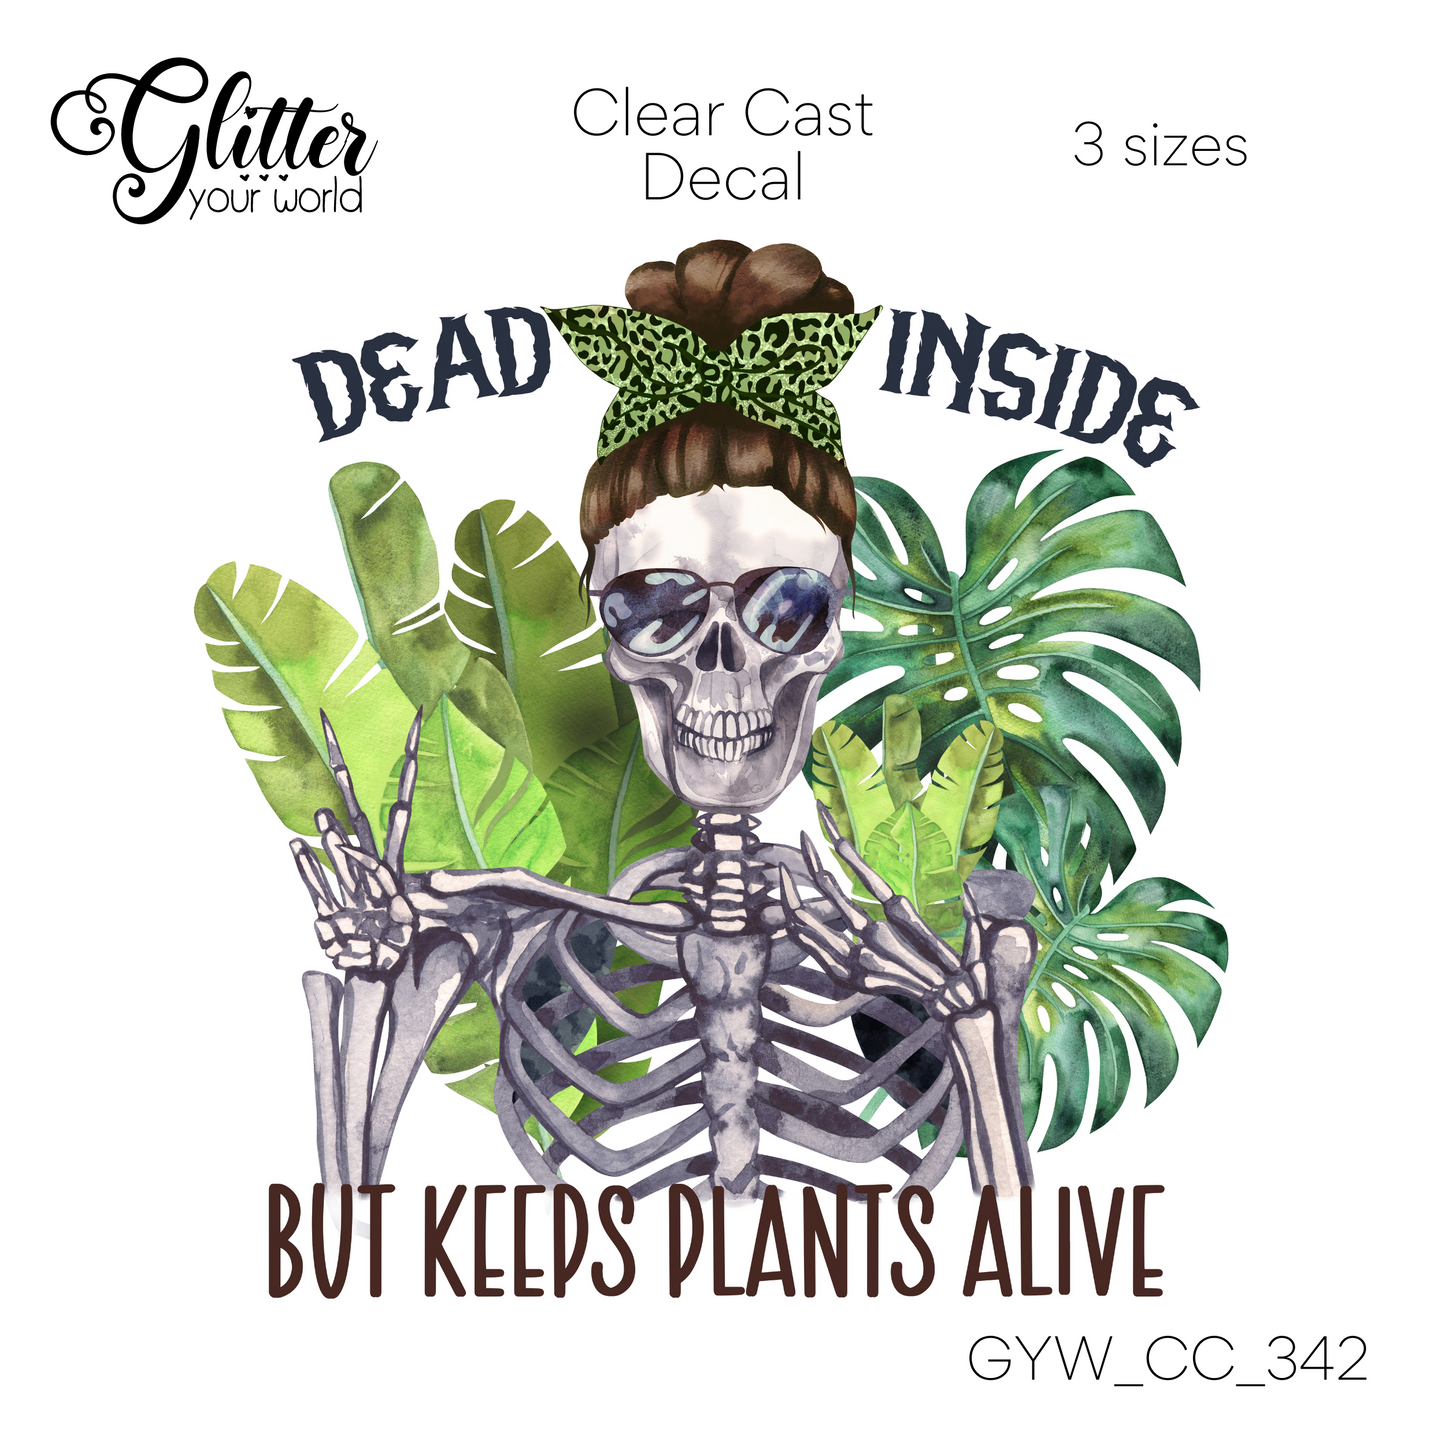 Keeps Plants Alive CC_342 Clear Cast Decal